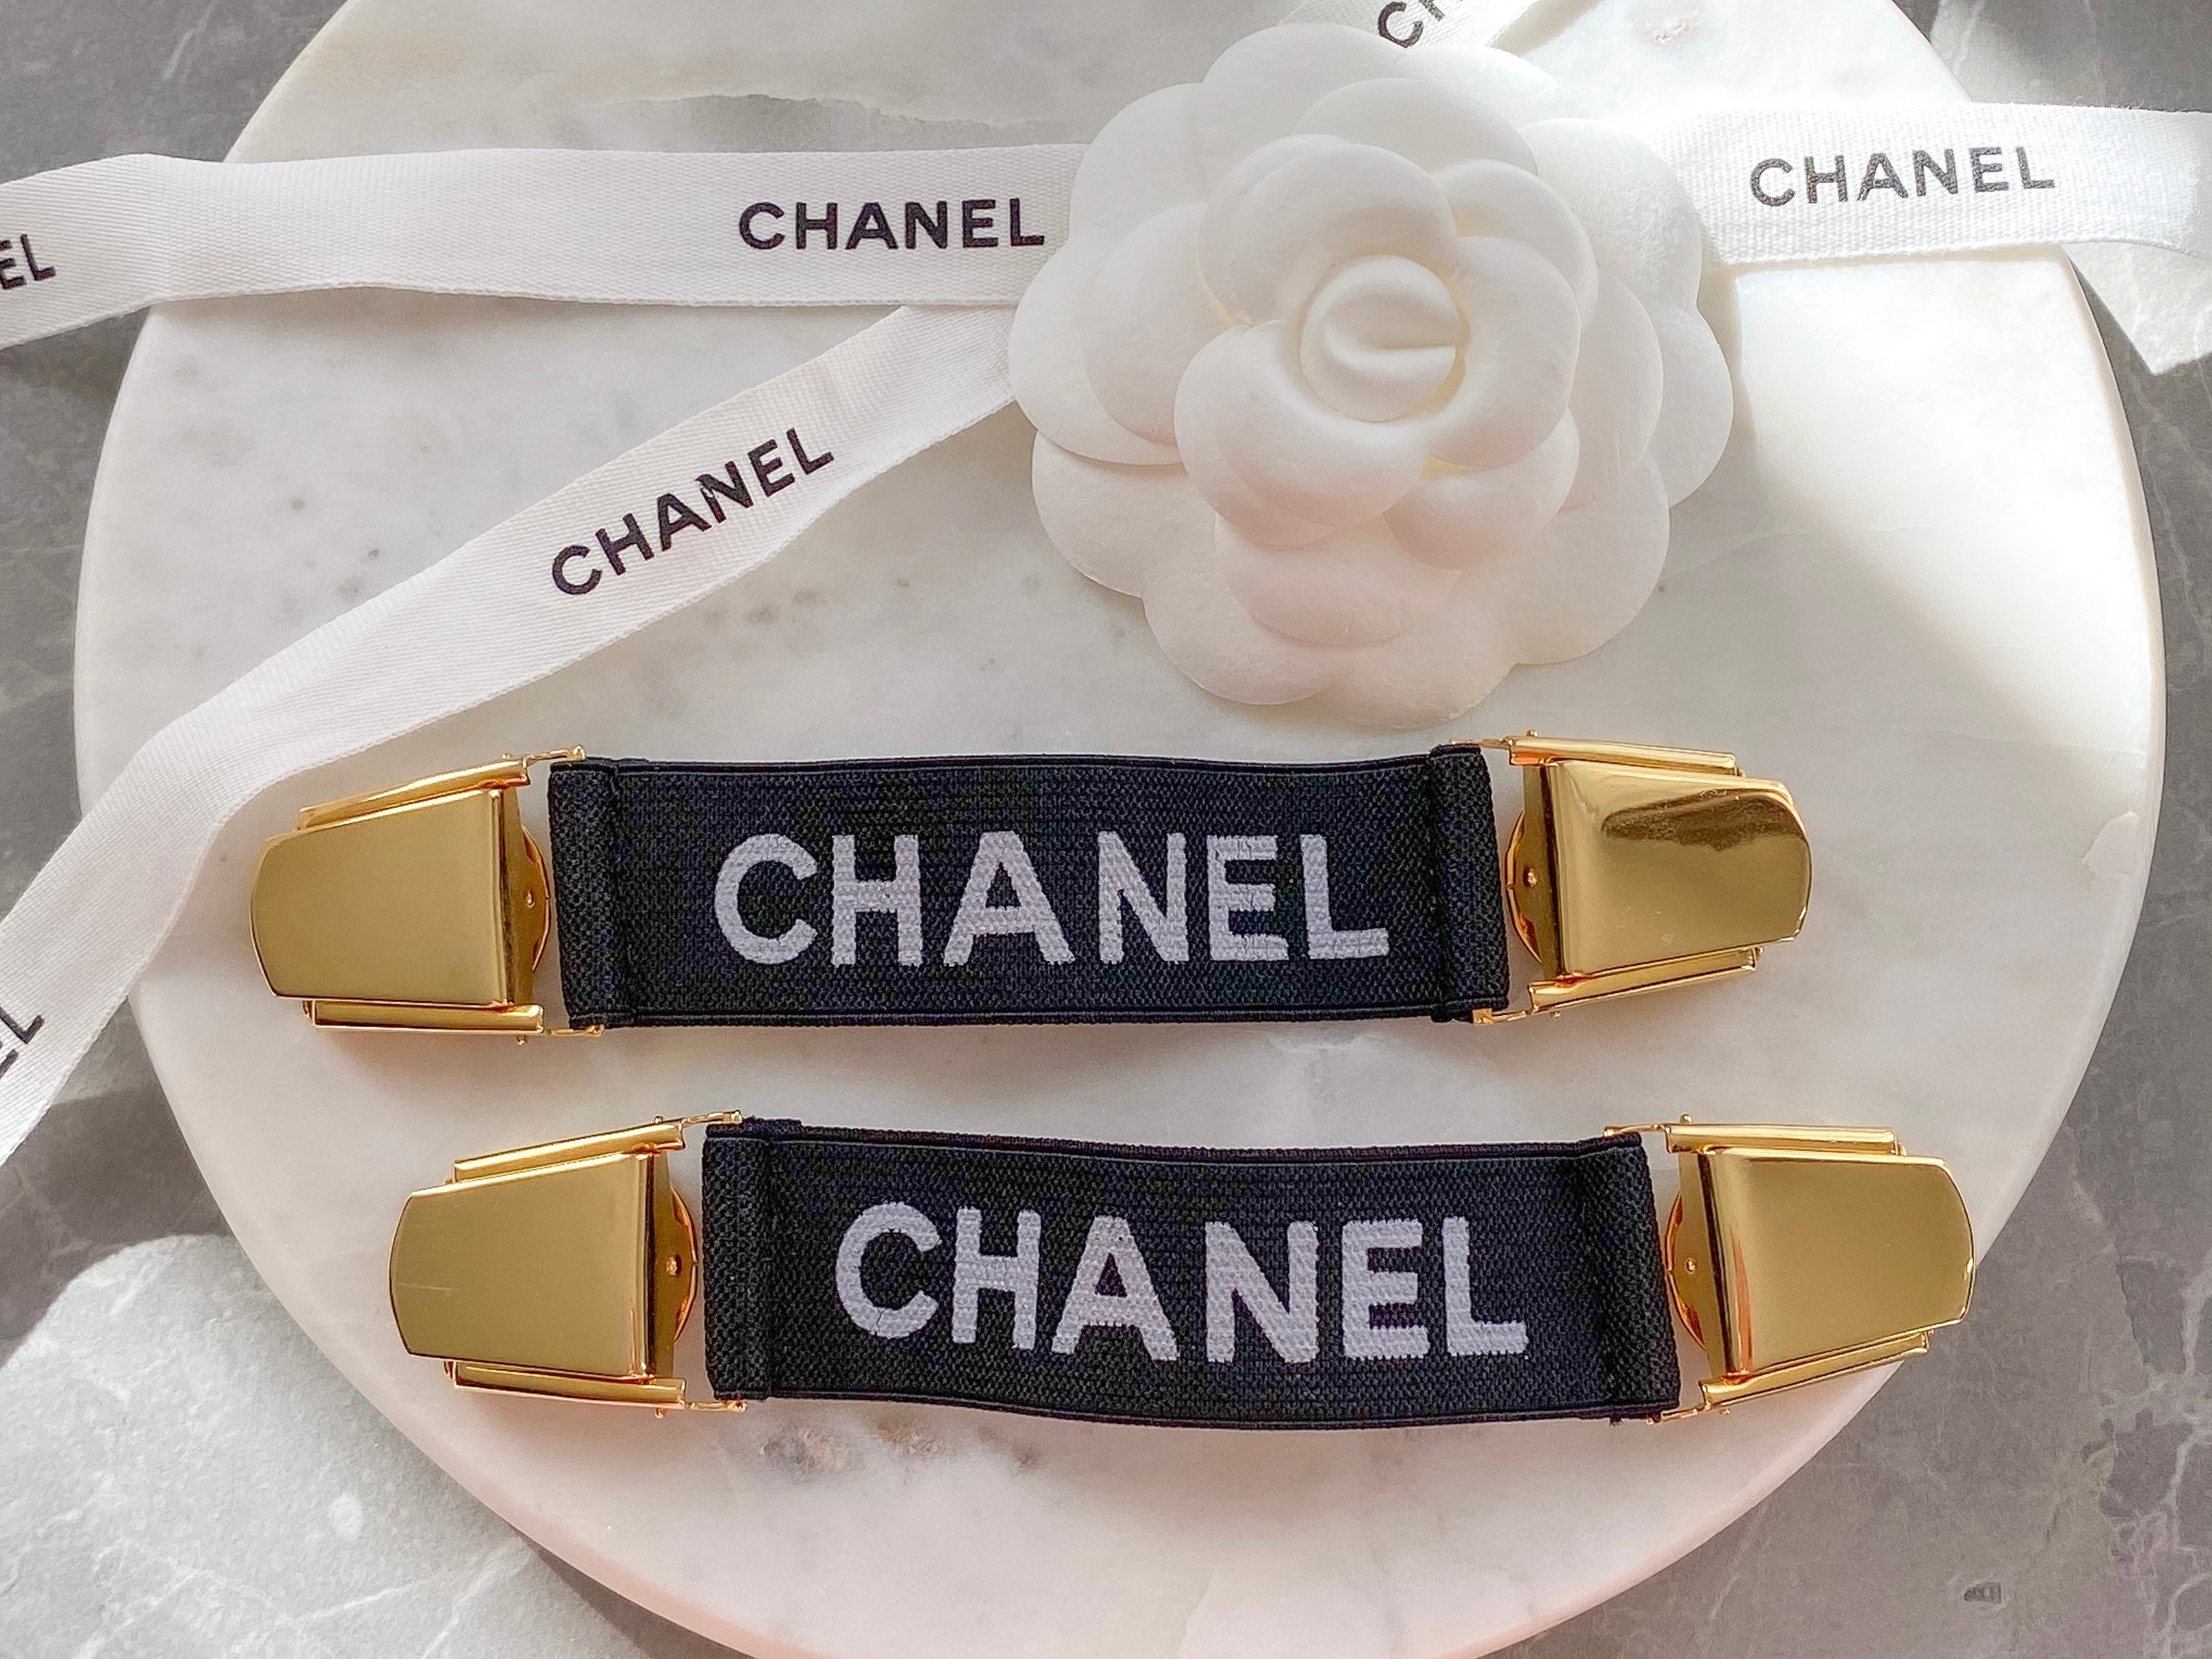 Chanel SUPER RARE Vintage Sleeve Suspenders From 1994